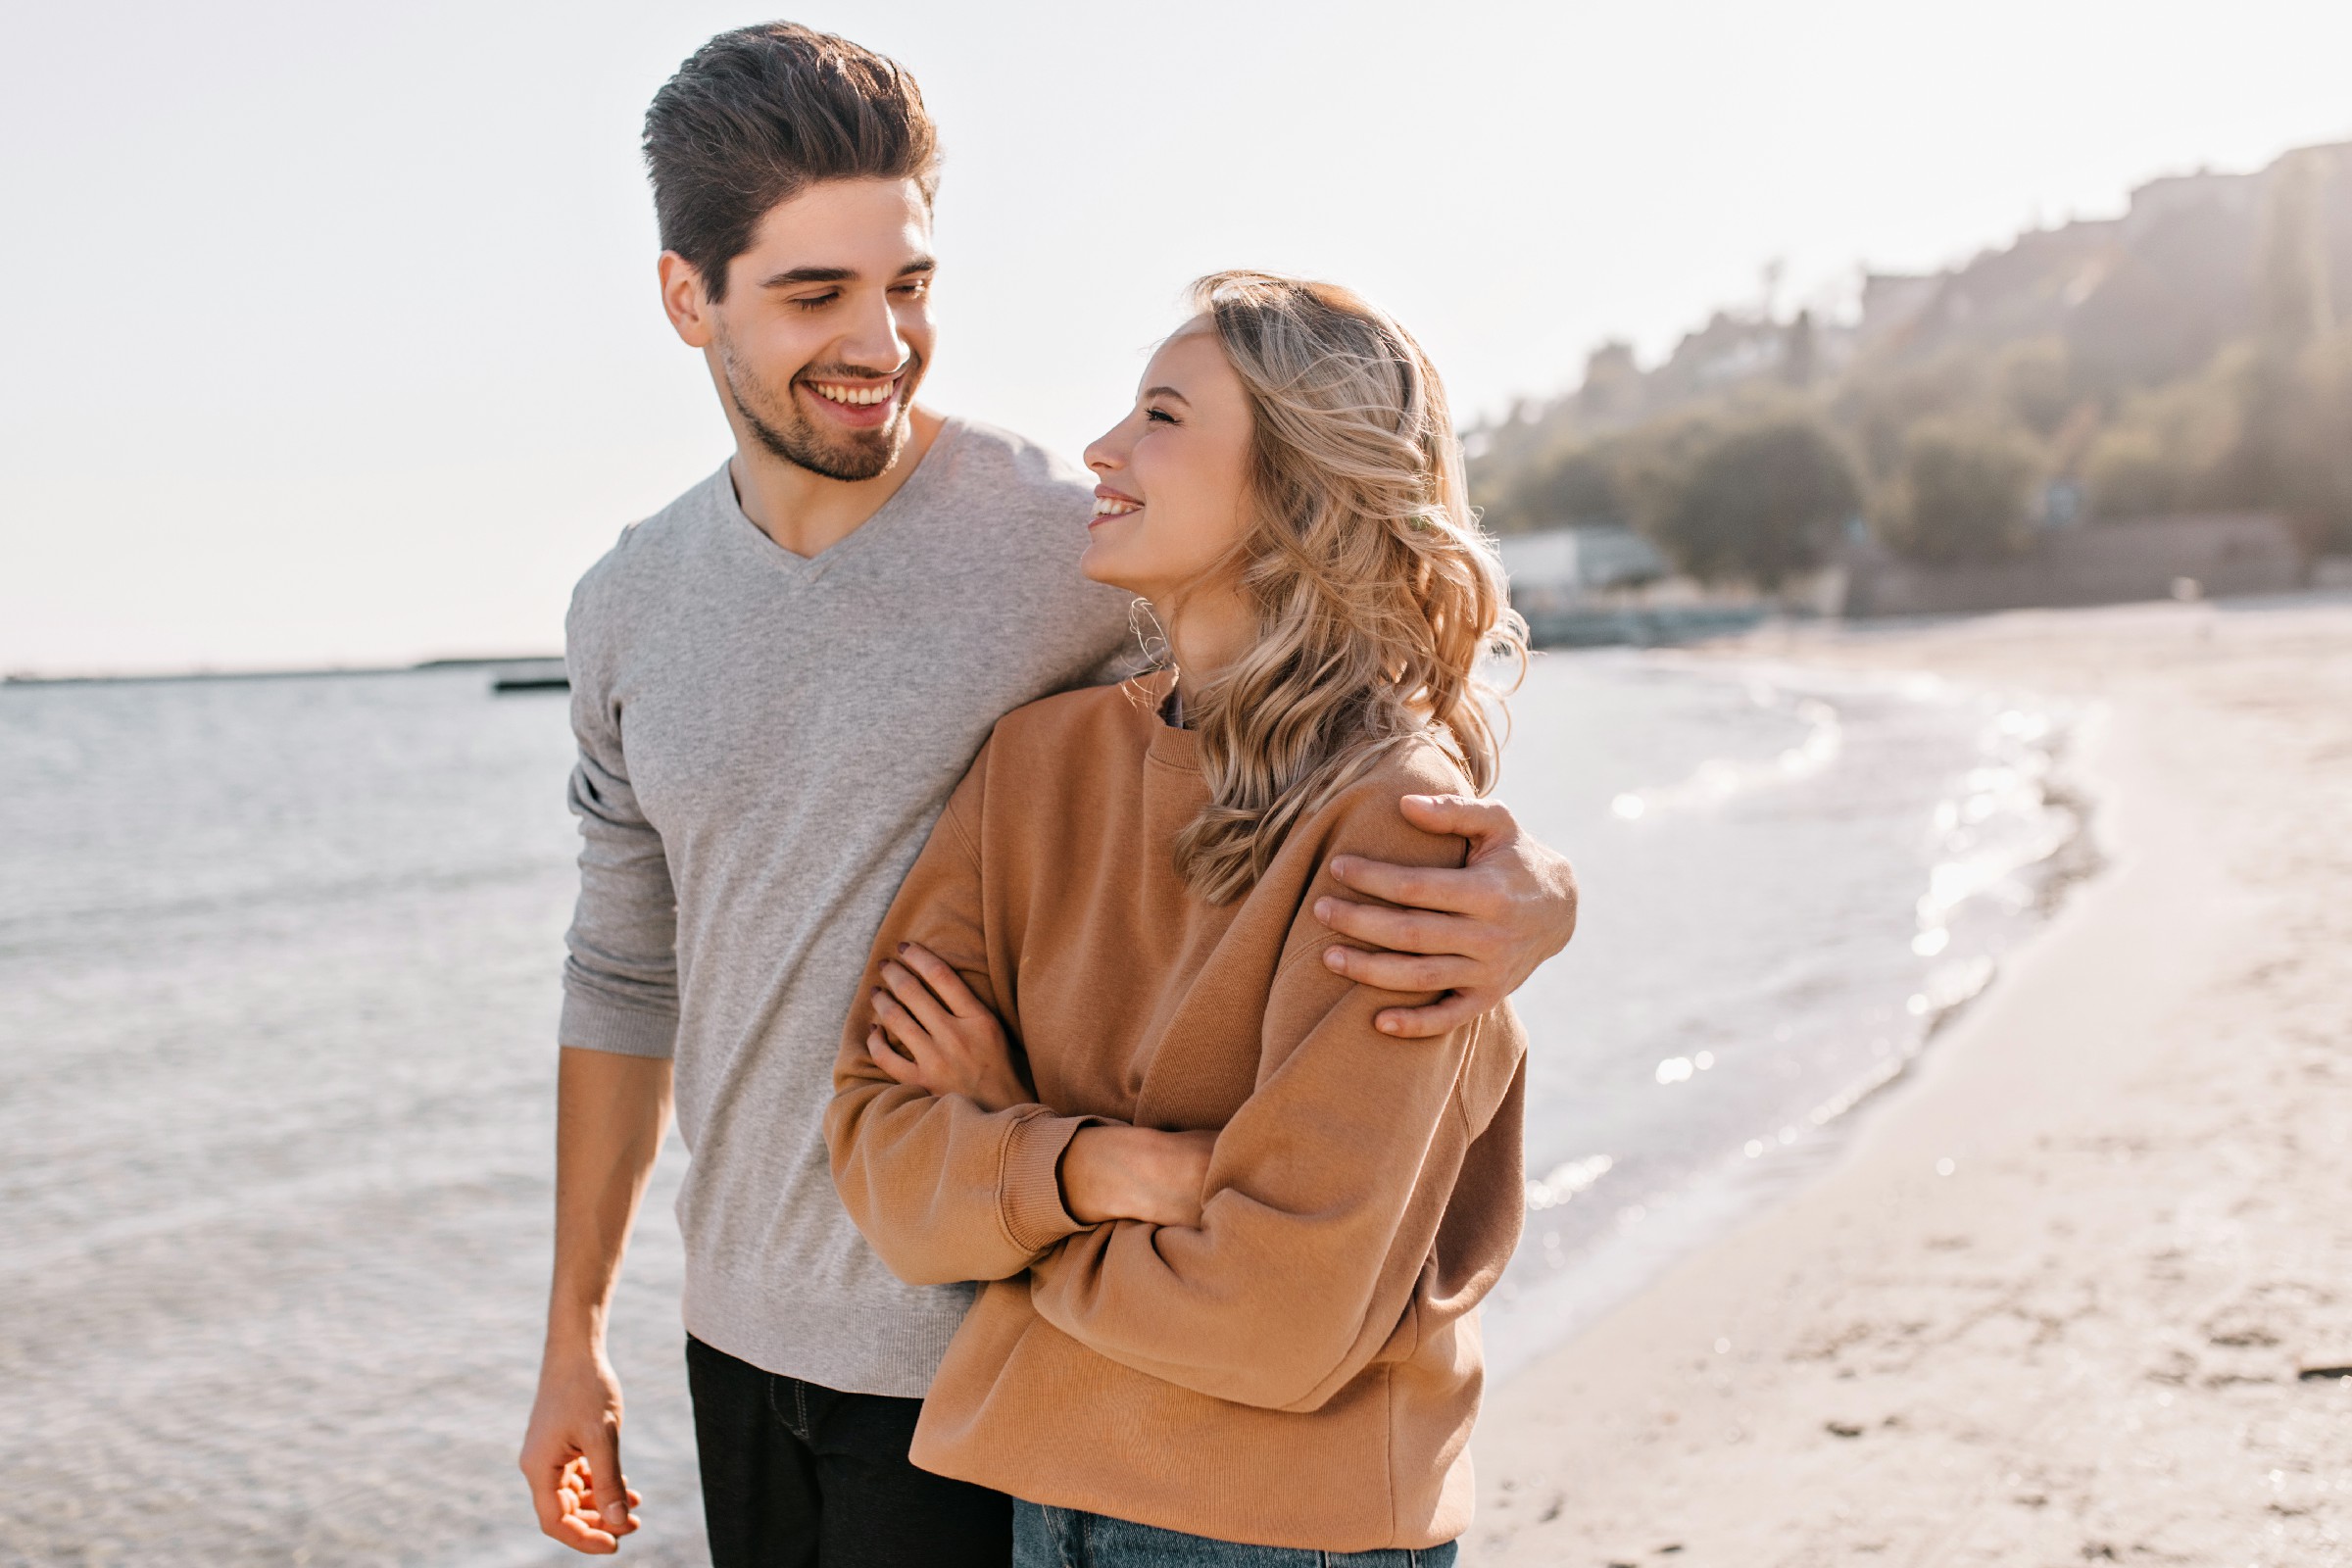 pleasant-young-man-embracing-girlfriend-nature-outdoor-portrait-pleased-blonde-girl-posing-sea-with-husband~1